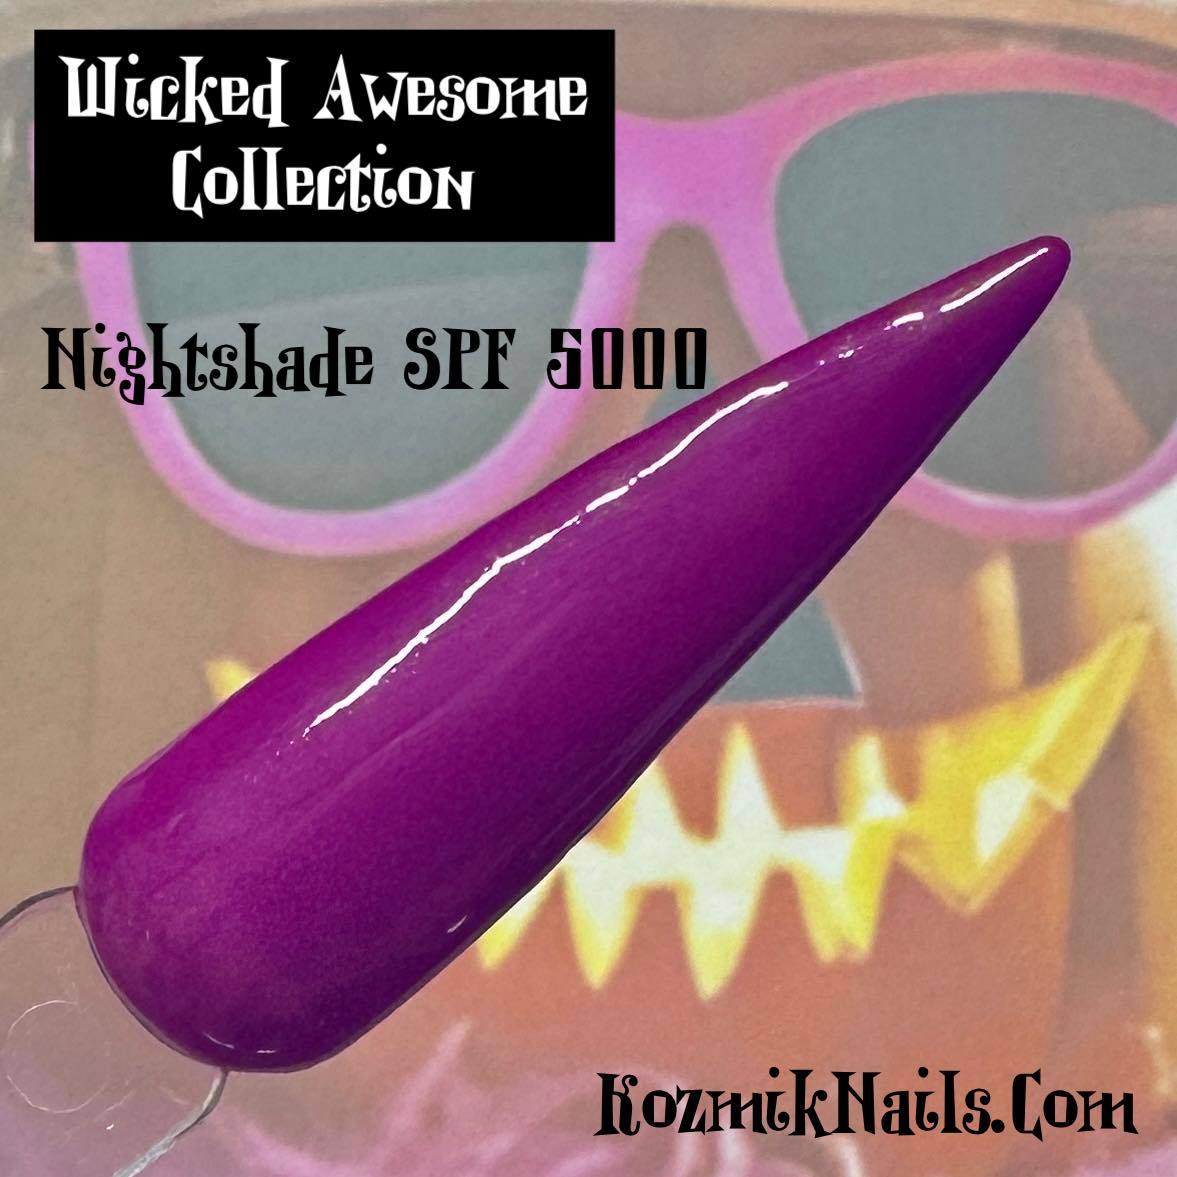 Wicked Awesome Collection